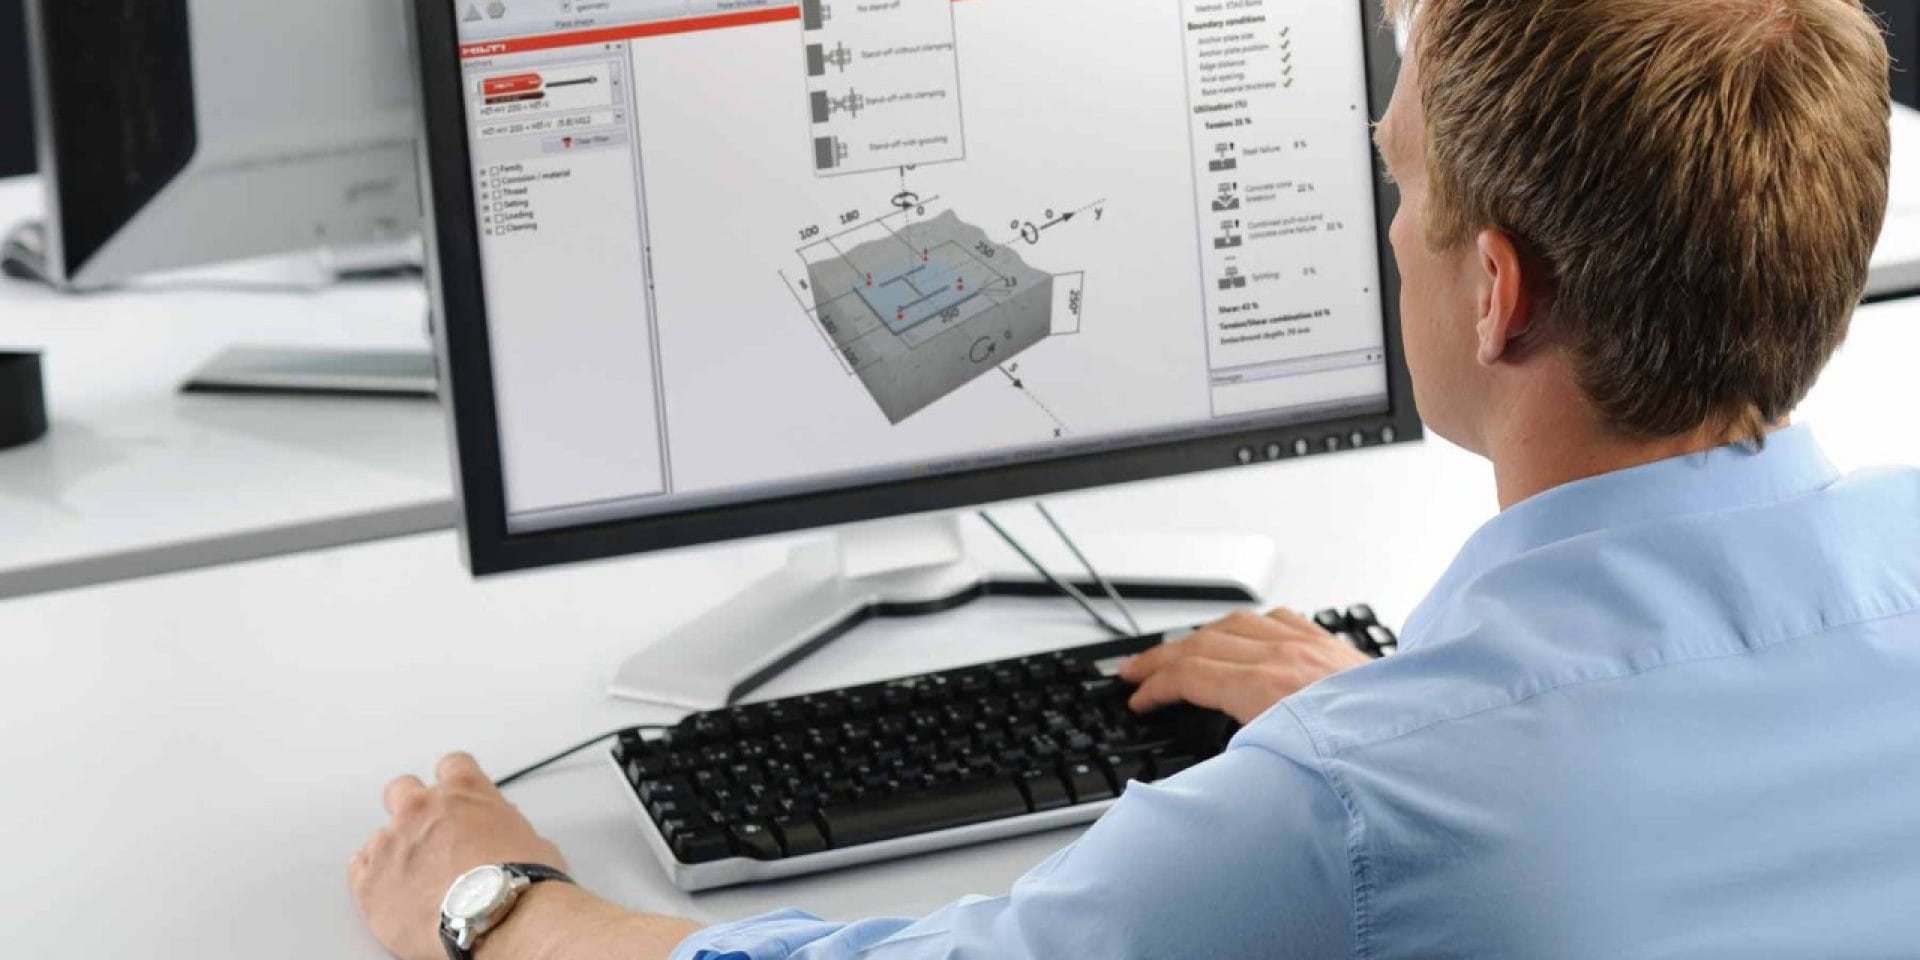 Hilti online for engineers